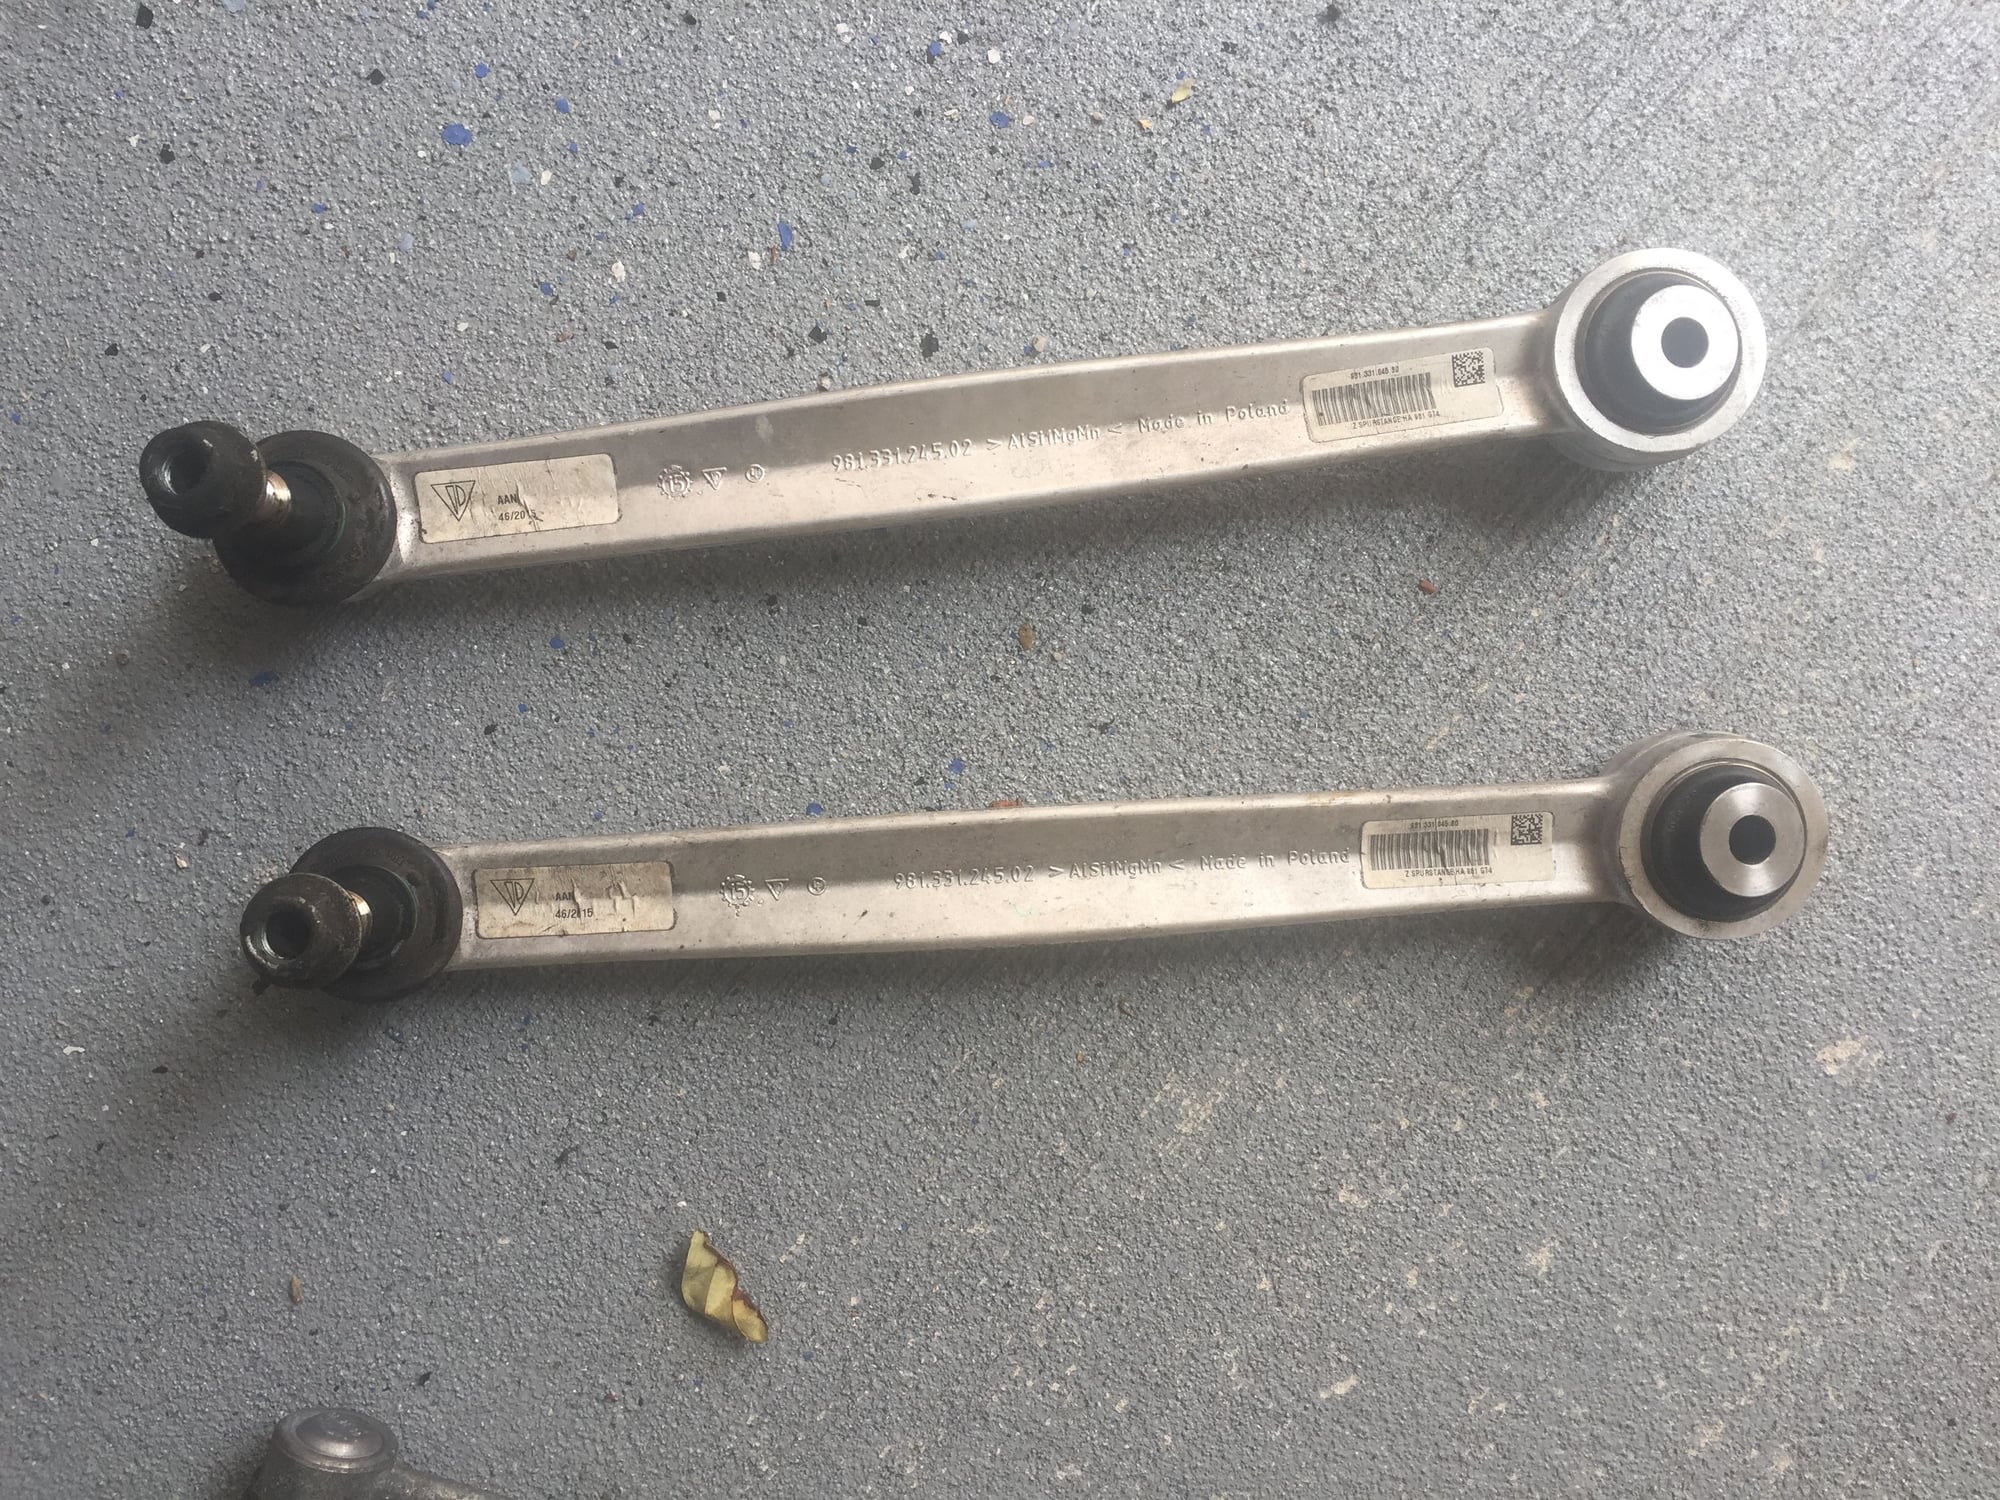 Steering/Suspension - GT4 OEM FRONT AND REAR DROP LINKS AND REAR TOE LINKS - Used - 2016 Porsche Cayman GT4 - New York, NY 10177, United States